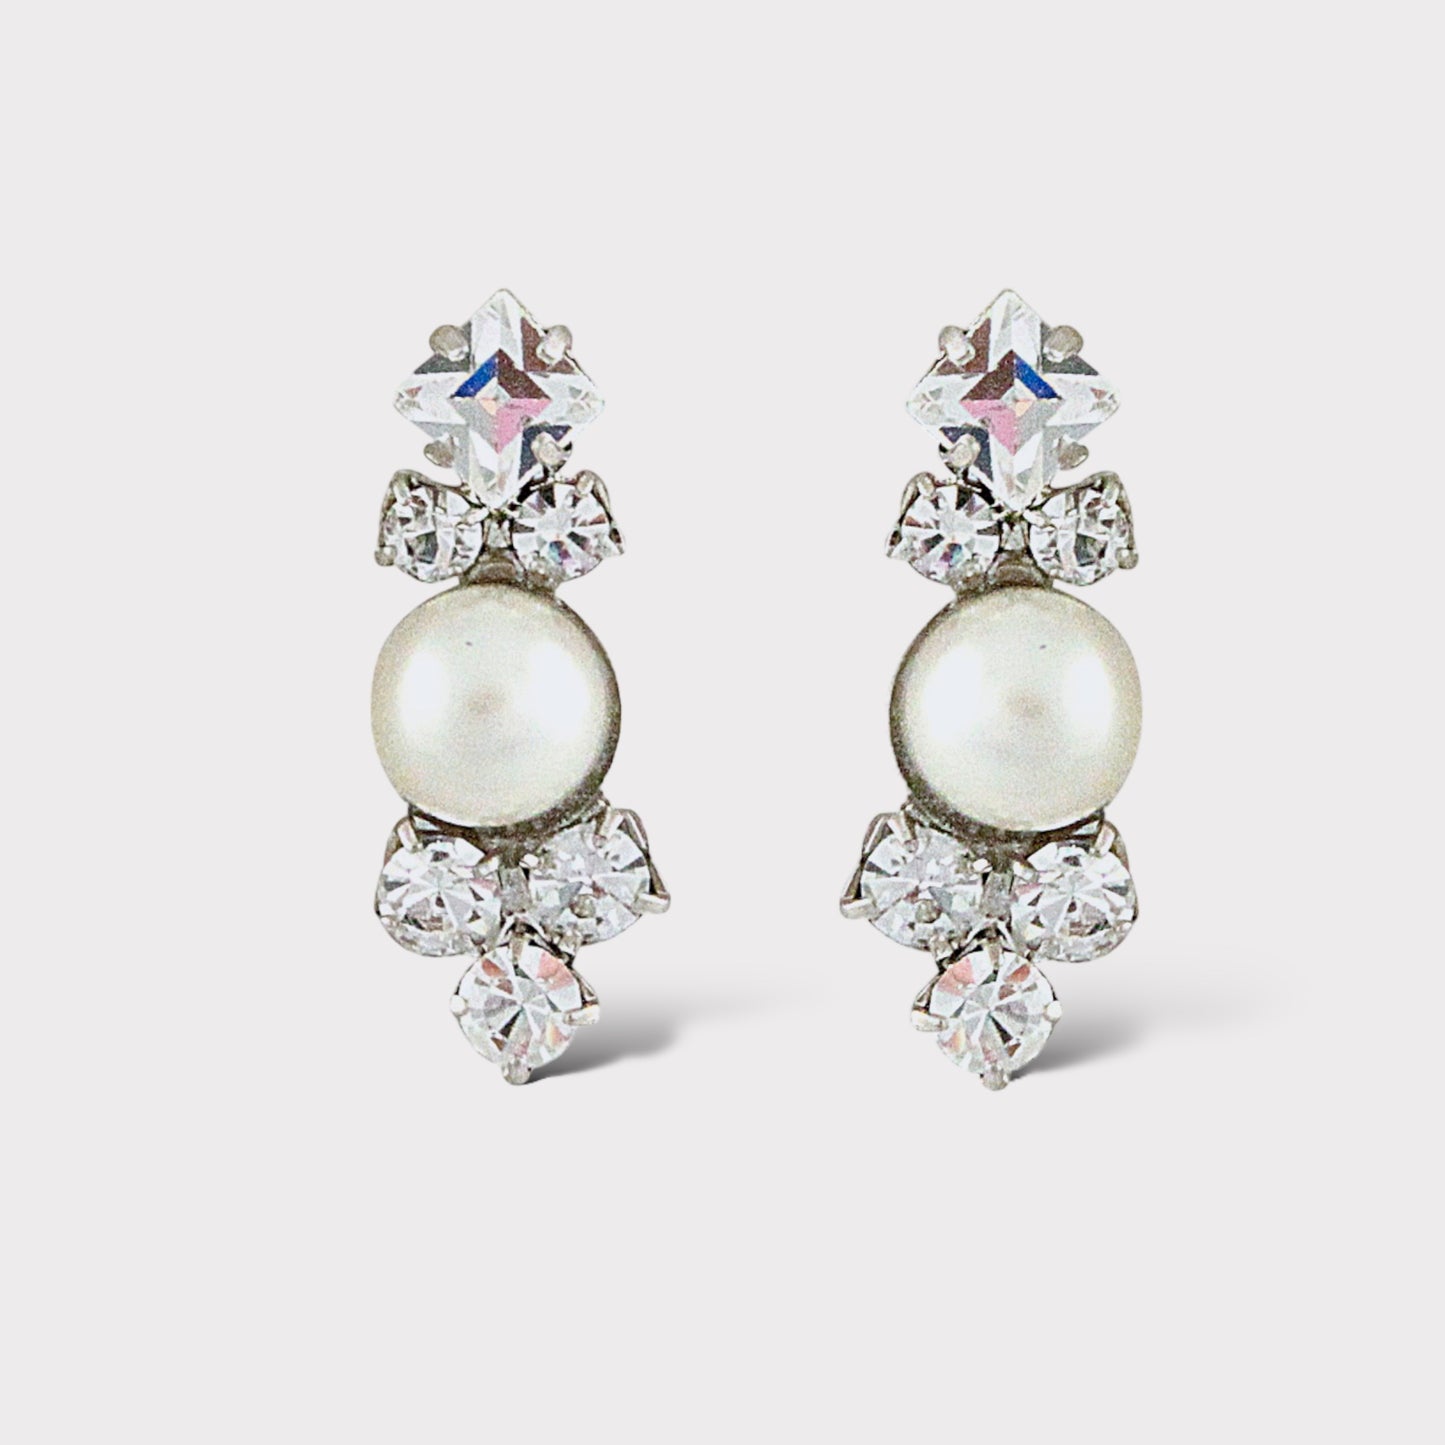 Pearl Stud Earrings Wedding Crystal Cluster Drop Earring Silver Art Deco Bridal Earring Vintage Jeweled Dainty Stud Bridesmaid Jewelry, LIV EARRINGS  for Her, for Bride, for Bridesmaid Gift , for Mother of the Bride, for Wedding Guest or Special Occasion by Camilla Christine Bridal Jewelry and Wedding Accessories. Bridal Style Inspiration Trends for Bride, Wedding Ideas